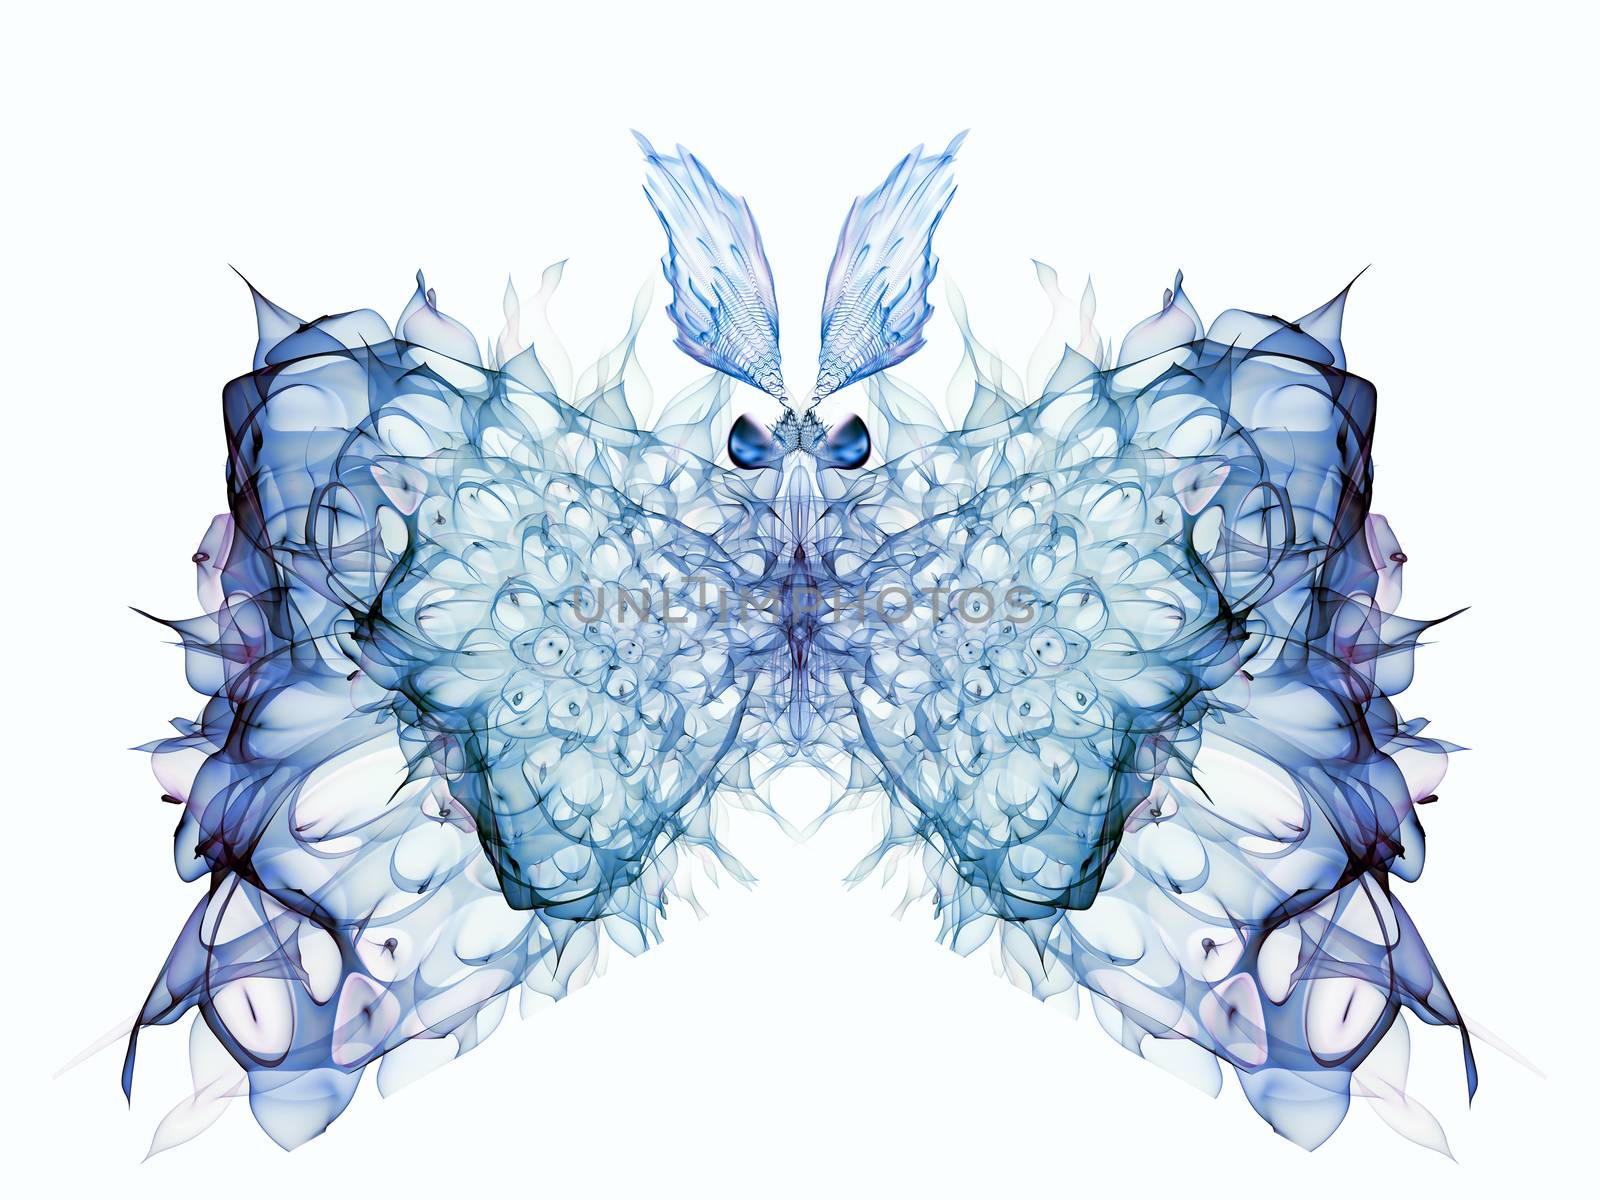 Never Were Butterflies series. Creative arrangement of isolated butterfly patterns as a concept metaphor on subject of science, imagination, creativity and design